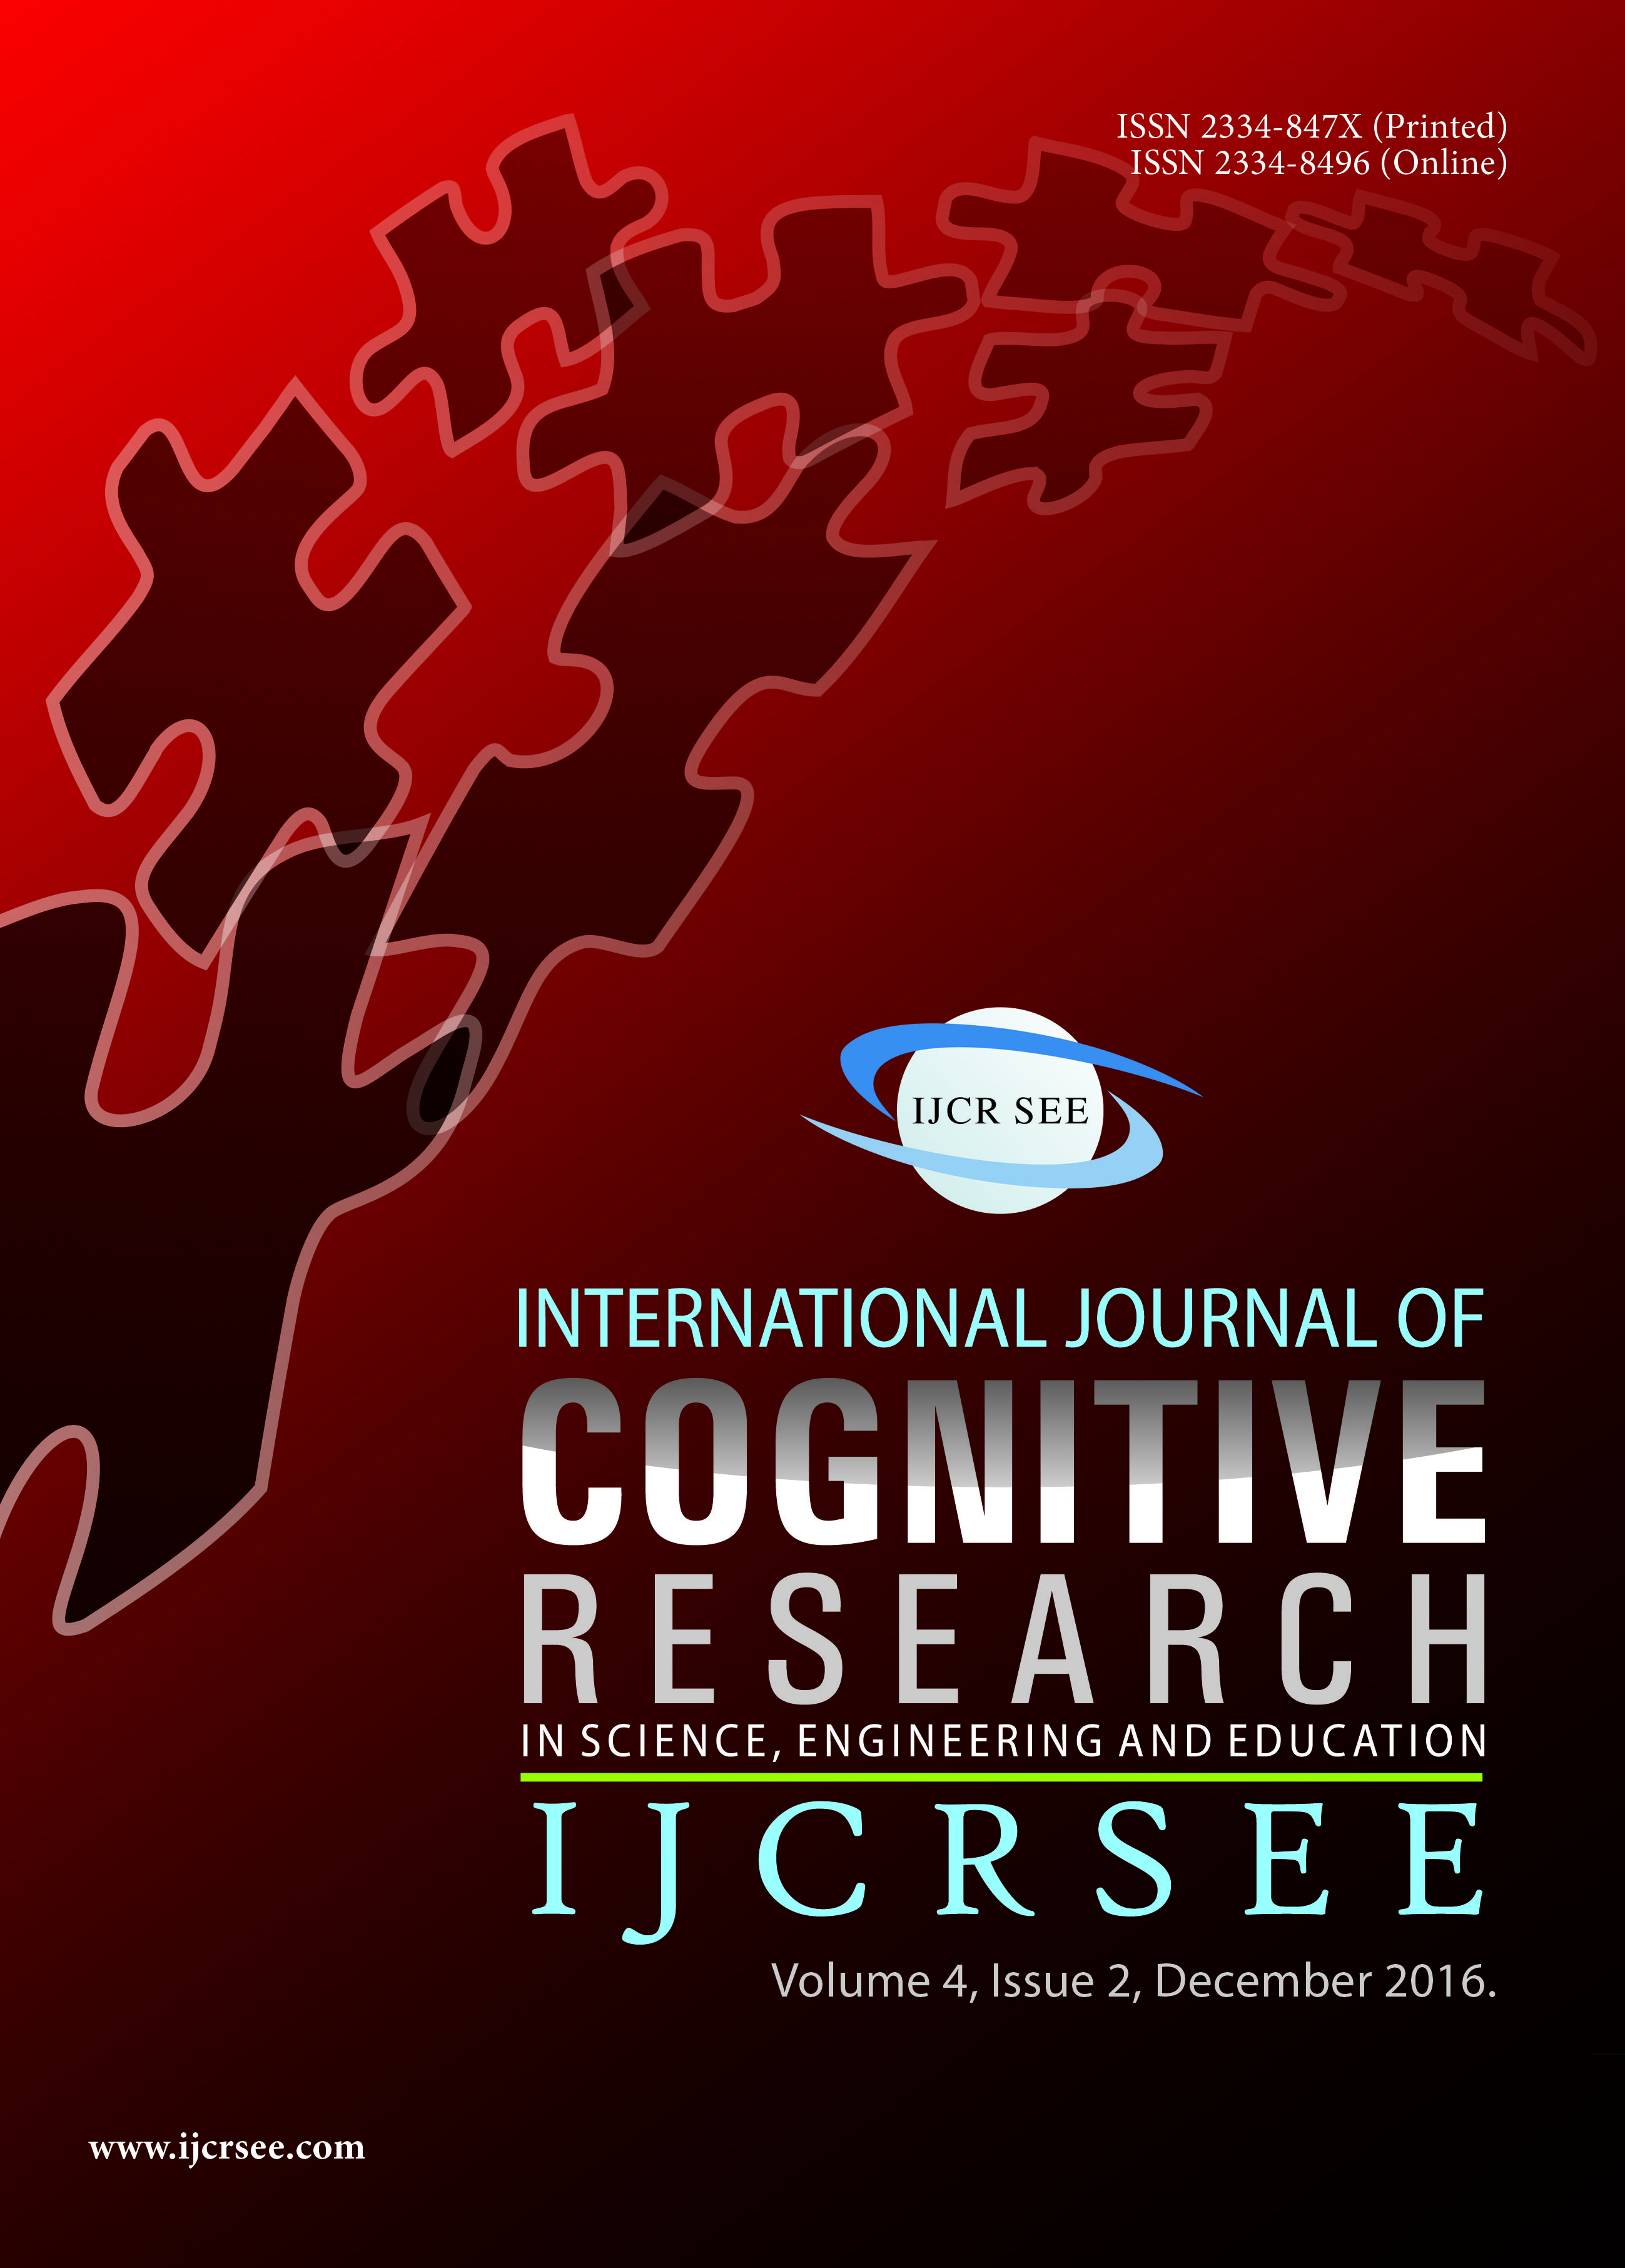 					View Vol. 4 No. 2 (2016): International Journal of Cognitive Research in Science, Engineering and Education (IJCRSEE)
				